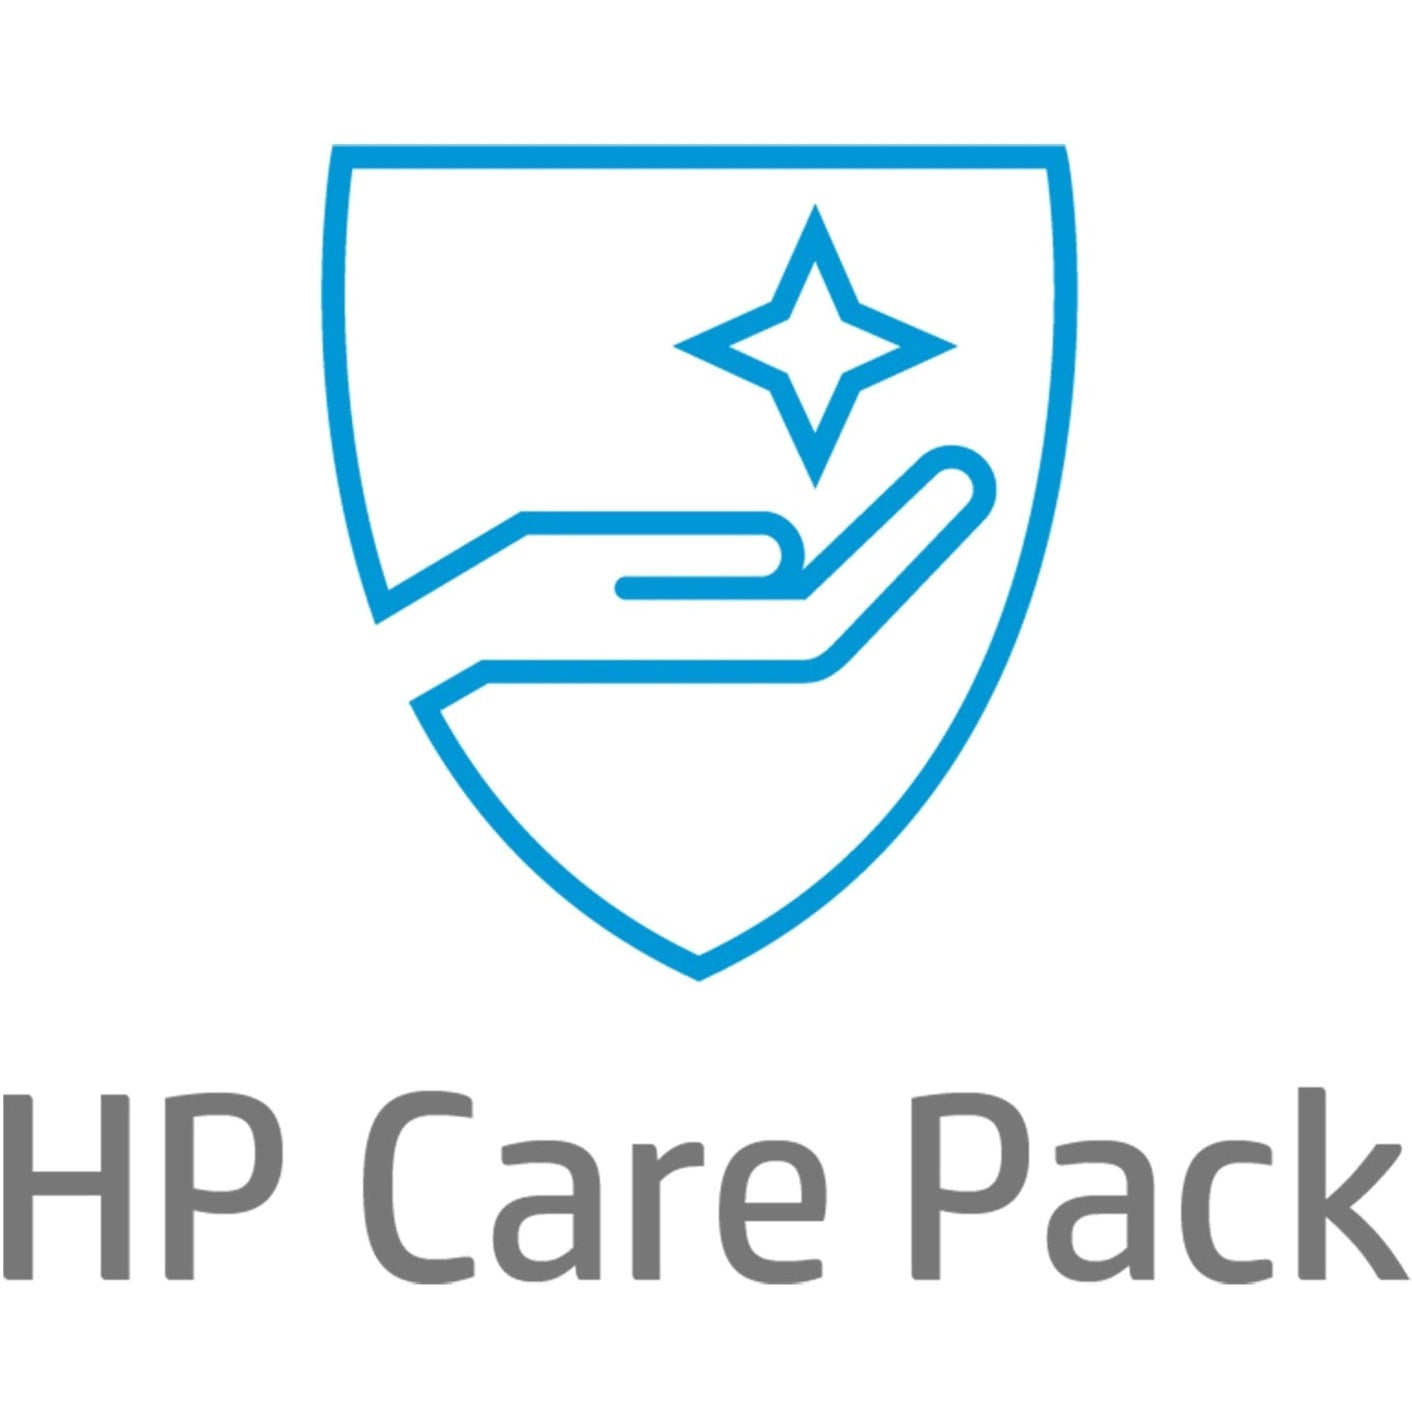 HP Care Pack Hardware Support with Defective Media Retention - 3 Year - Warranty (U9MU3E)